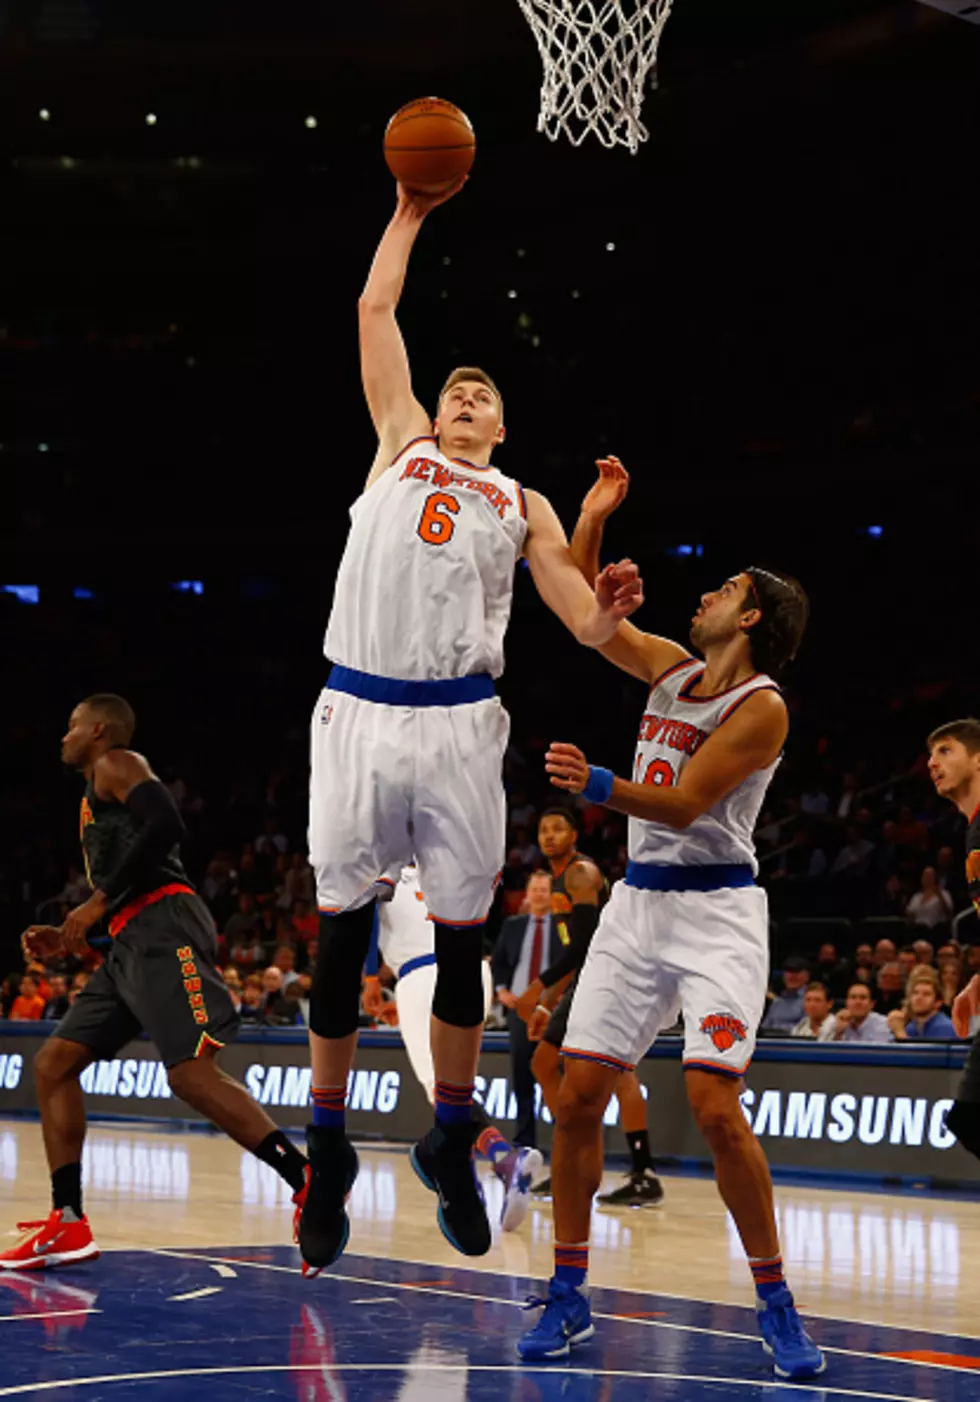 Porzingis Dazzles Crowd with Steal, Dunk (Video)